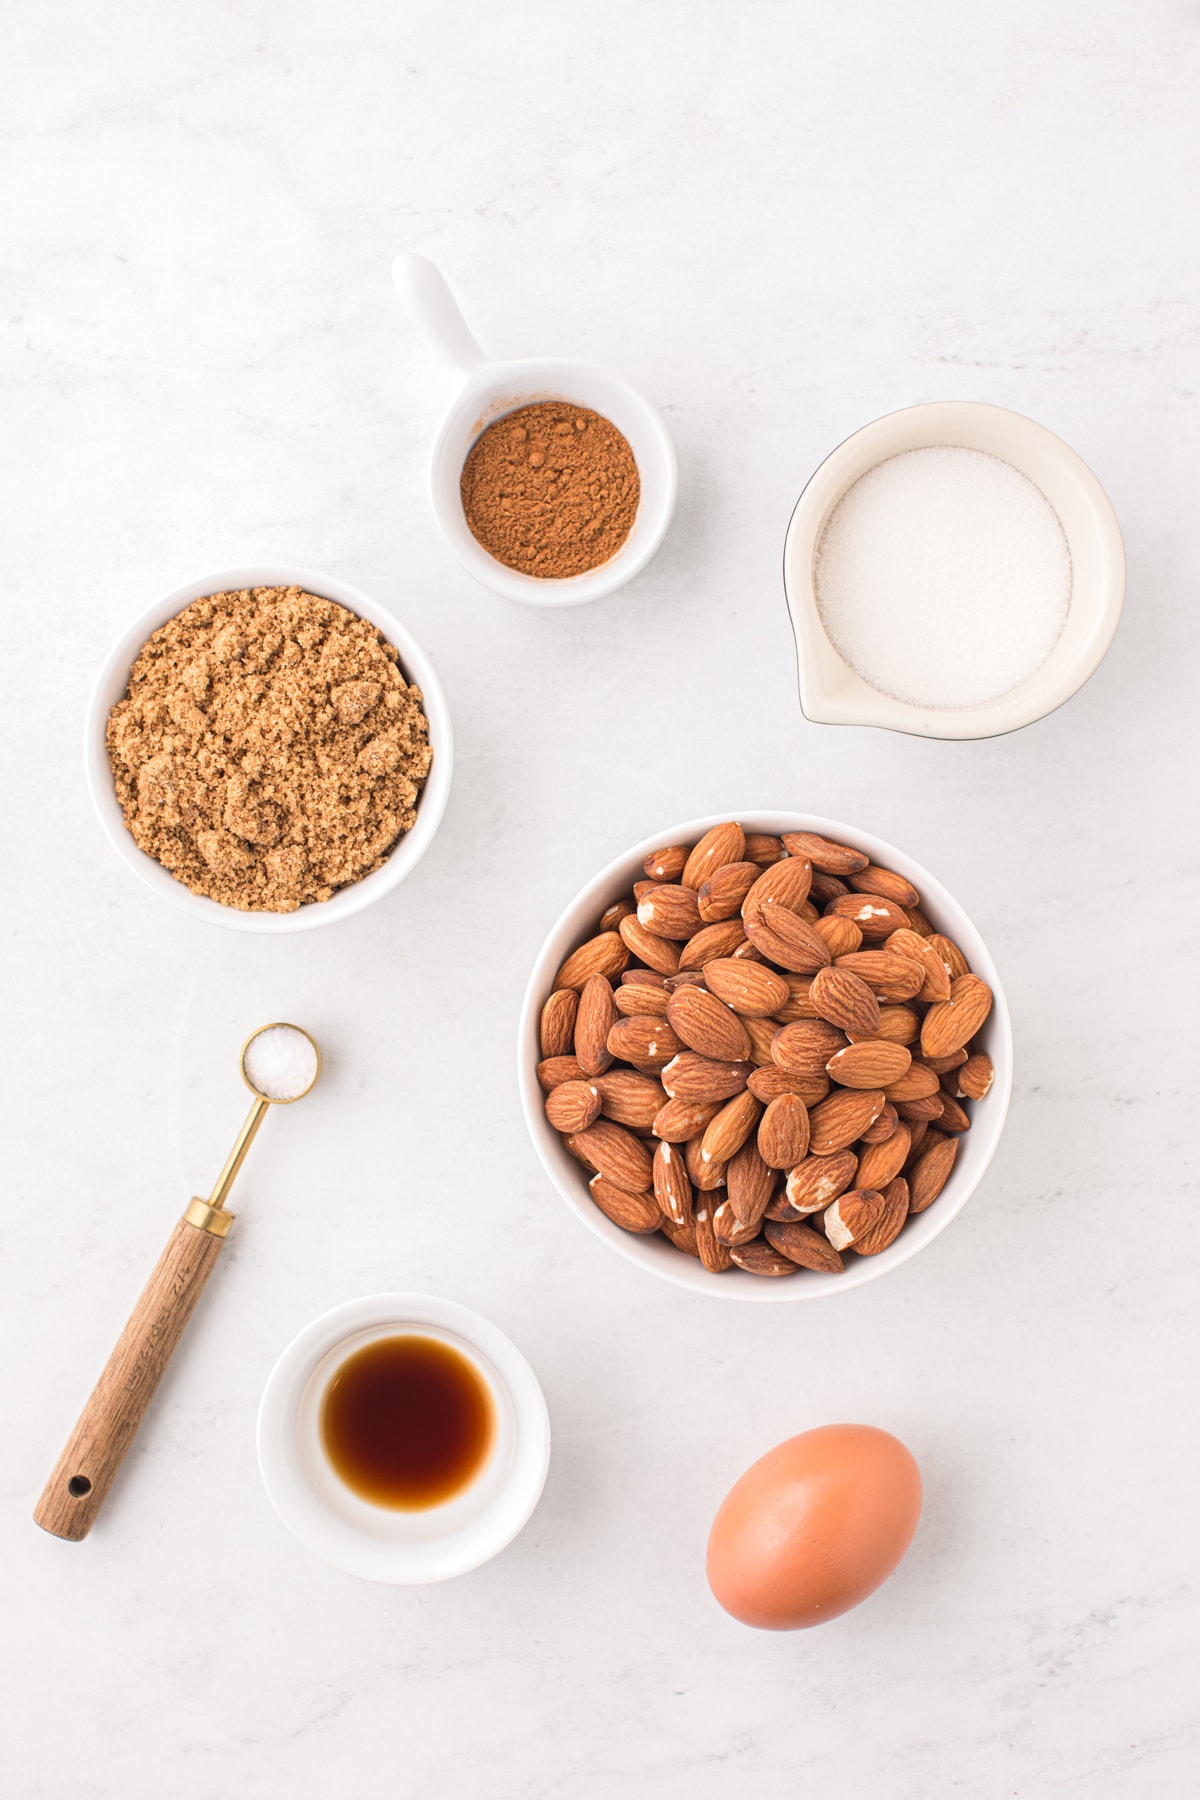 A bowl of almonds, eggs, sugar and other ingredients on a white background.